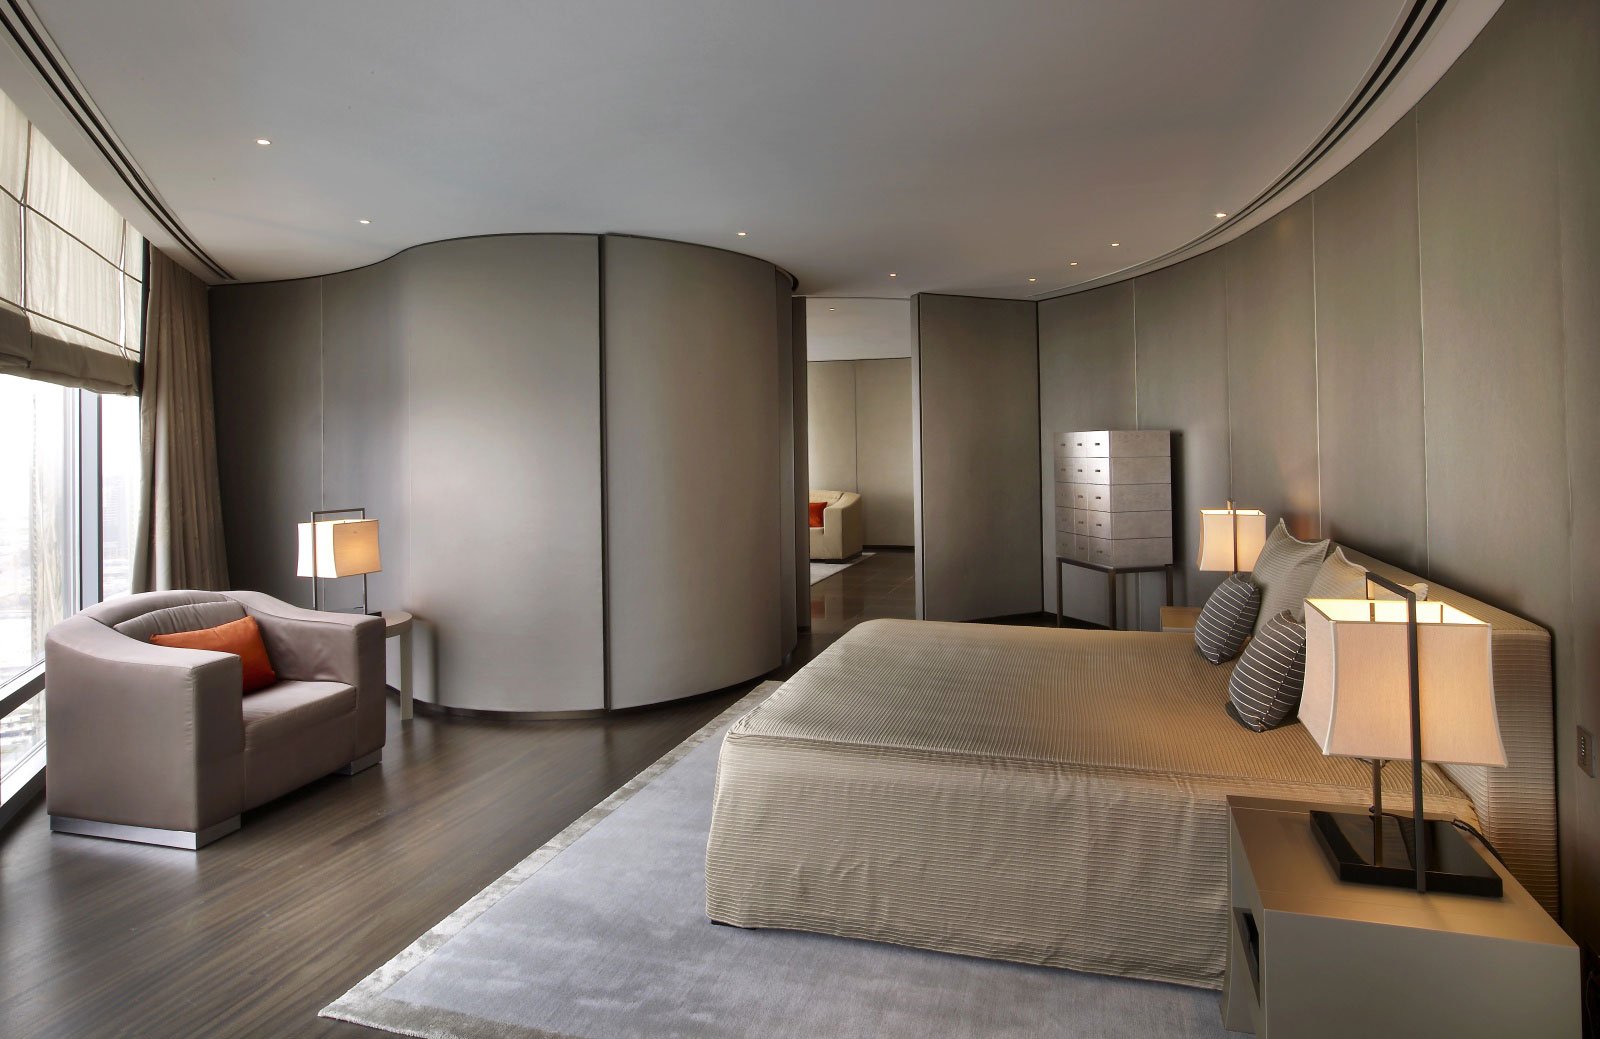 Armani Hotel Dubai Is The World's Most Luxurious Hotel – News & Events by  BRABBU DESIGN FORCES